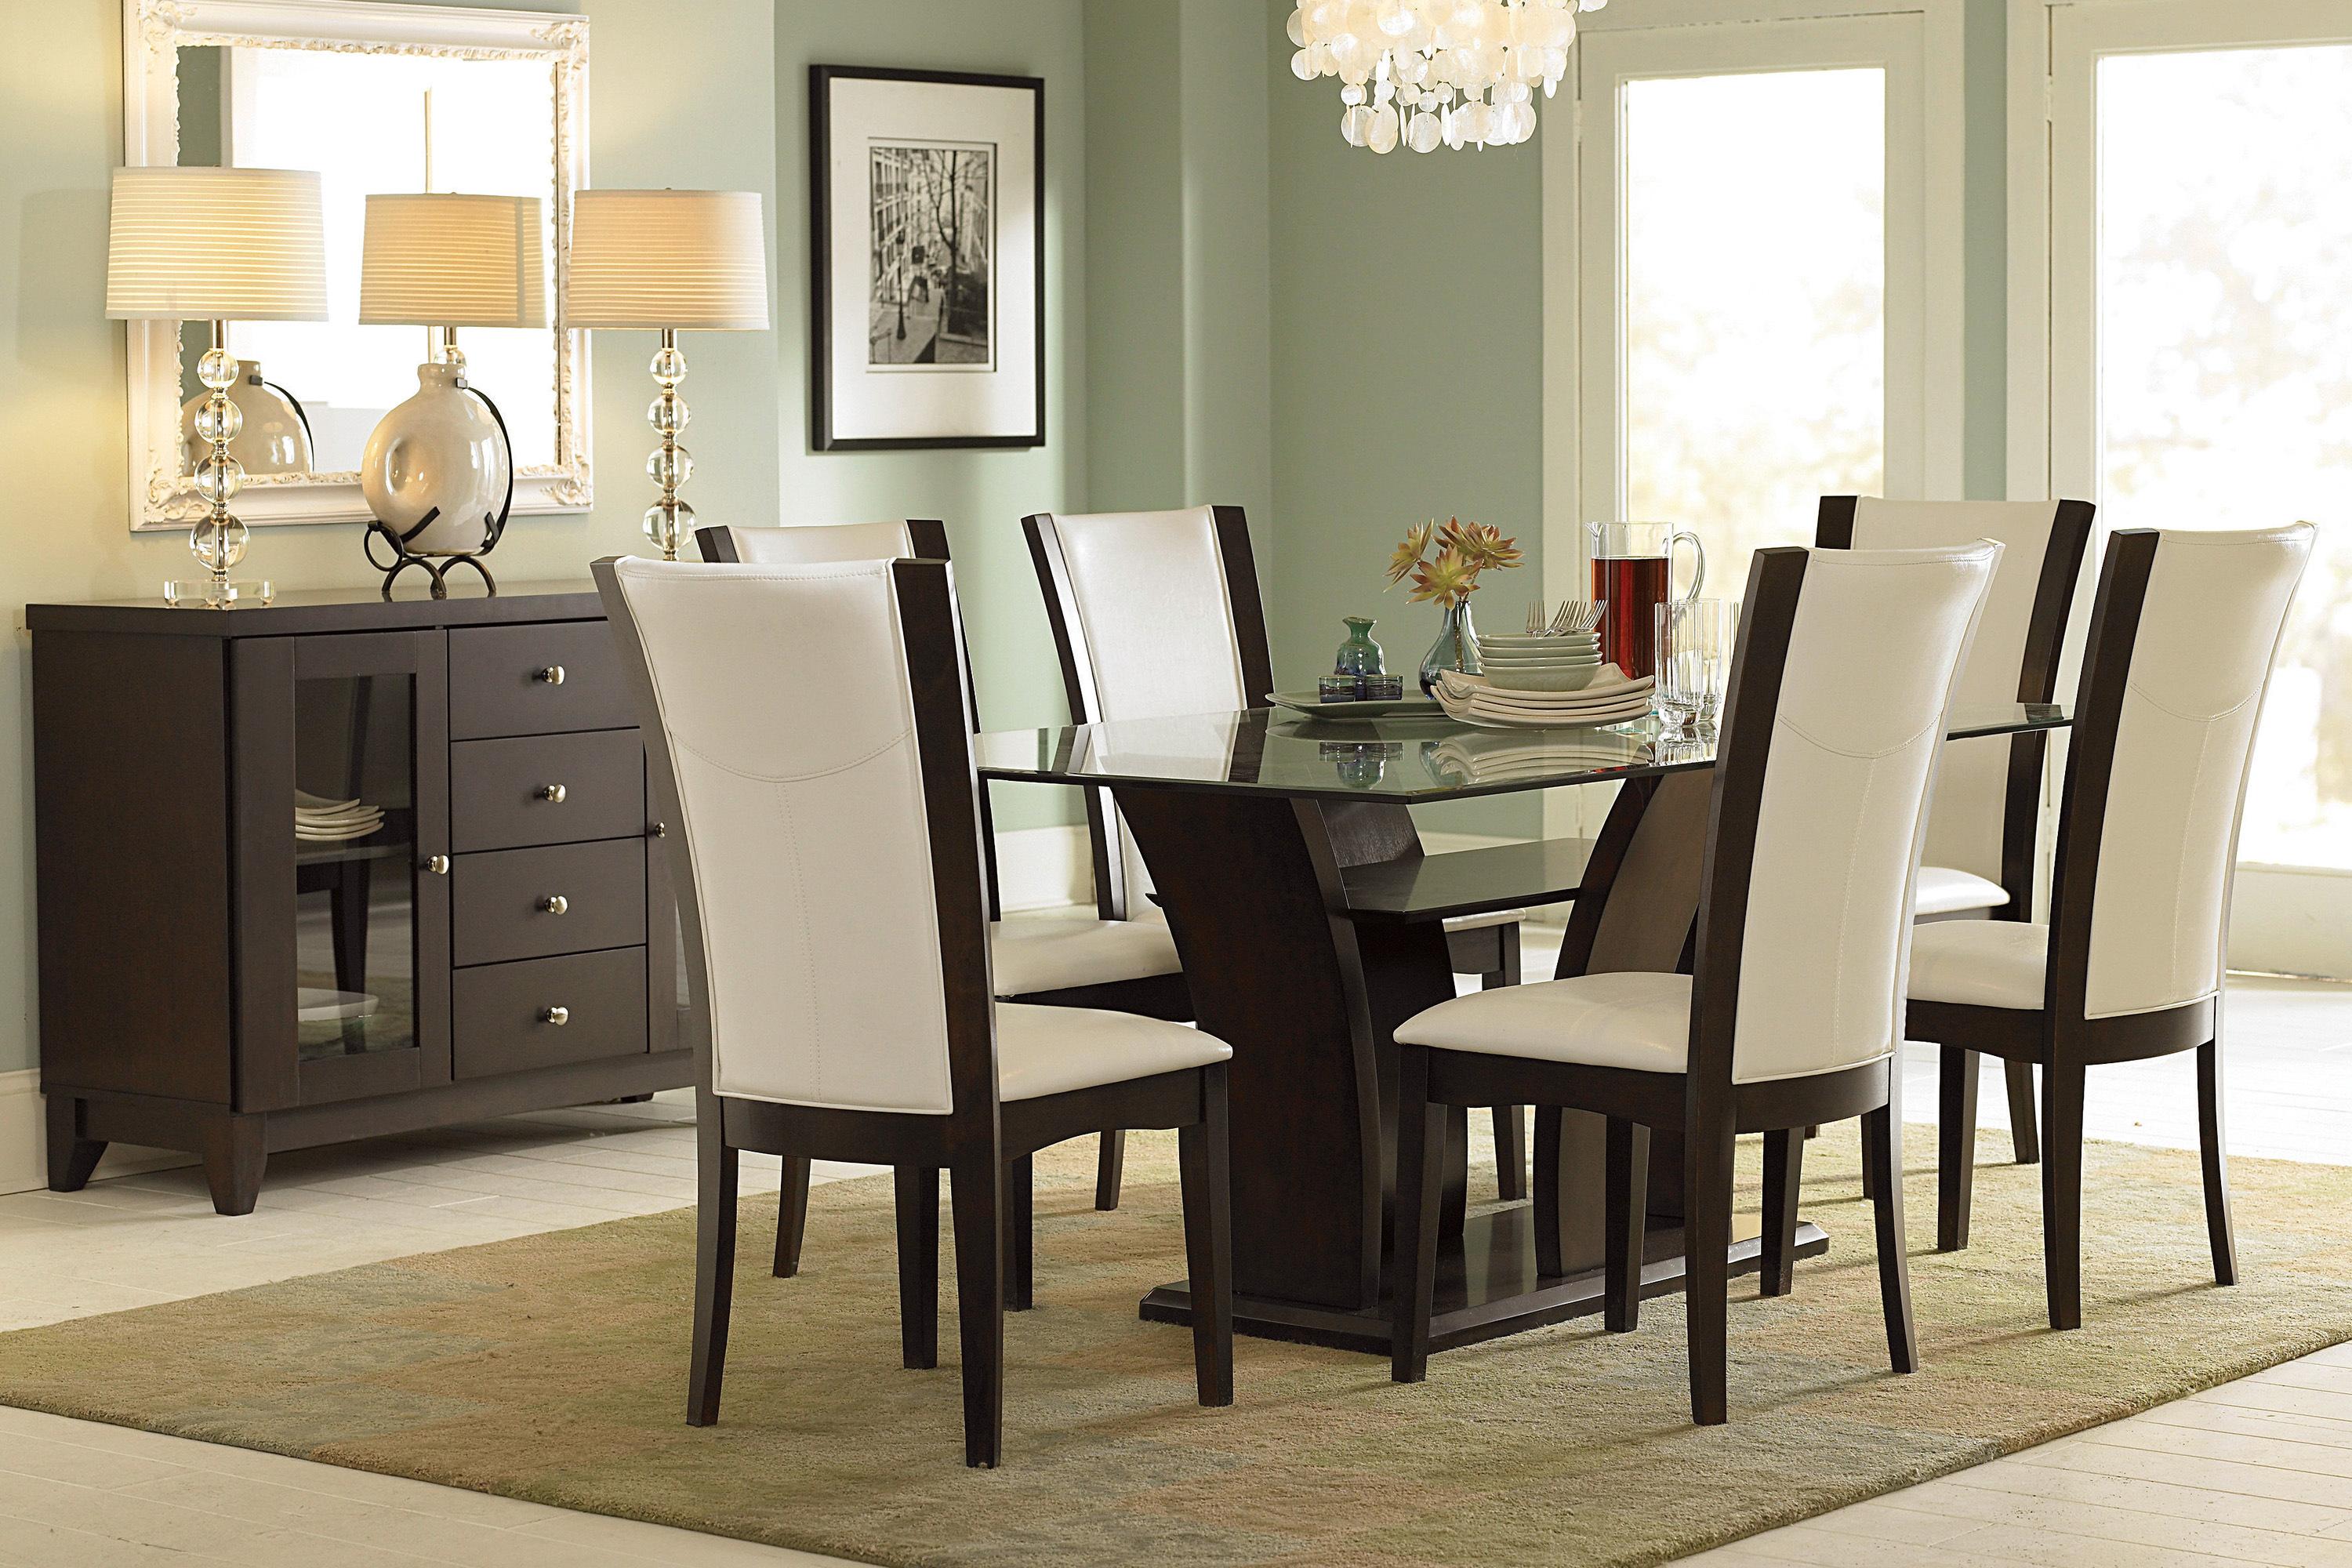 Contemporary Dining Room Set 710-71-W-8PC Daisy 710-71-W-8PC in Espresso, White Faux Leather